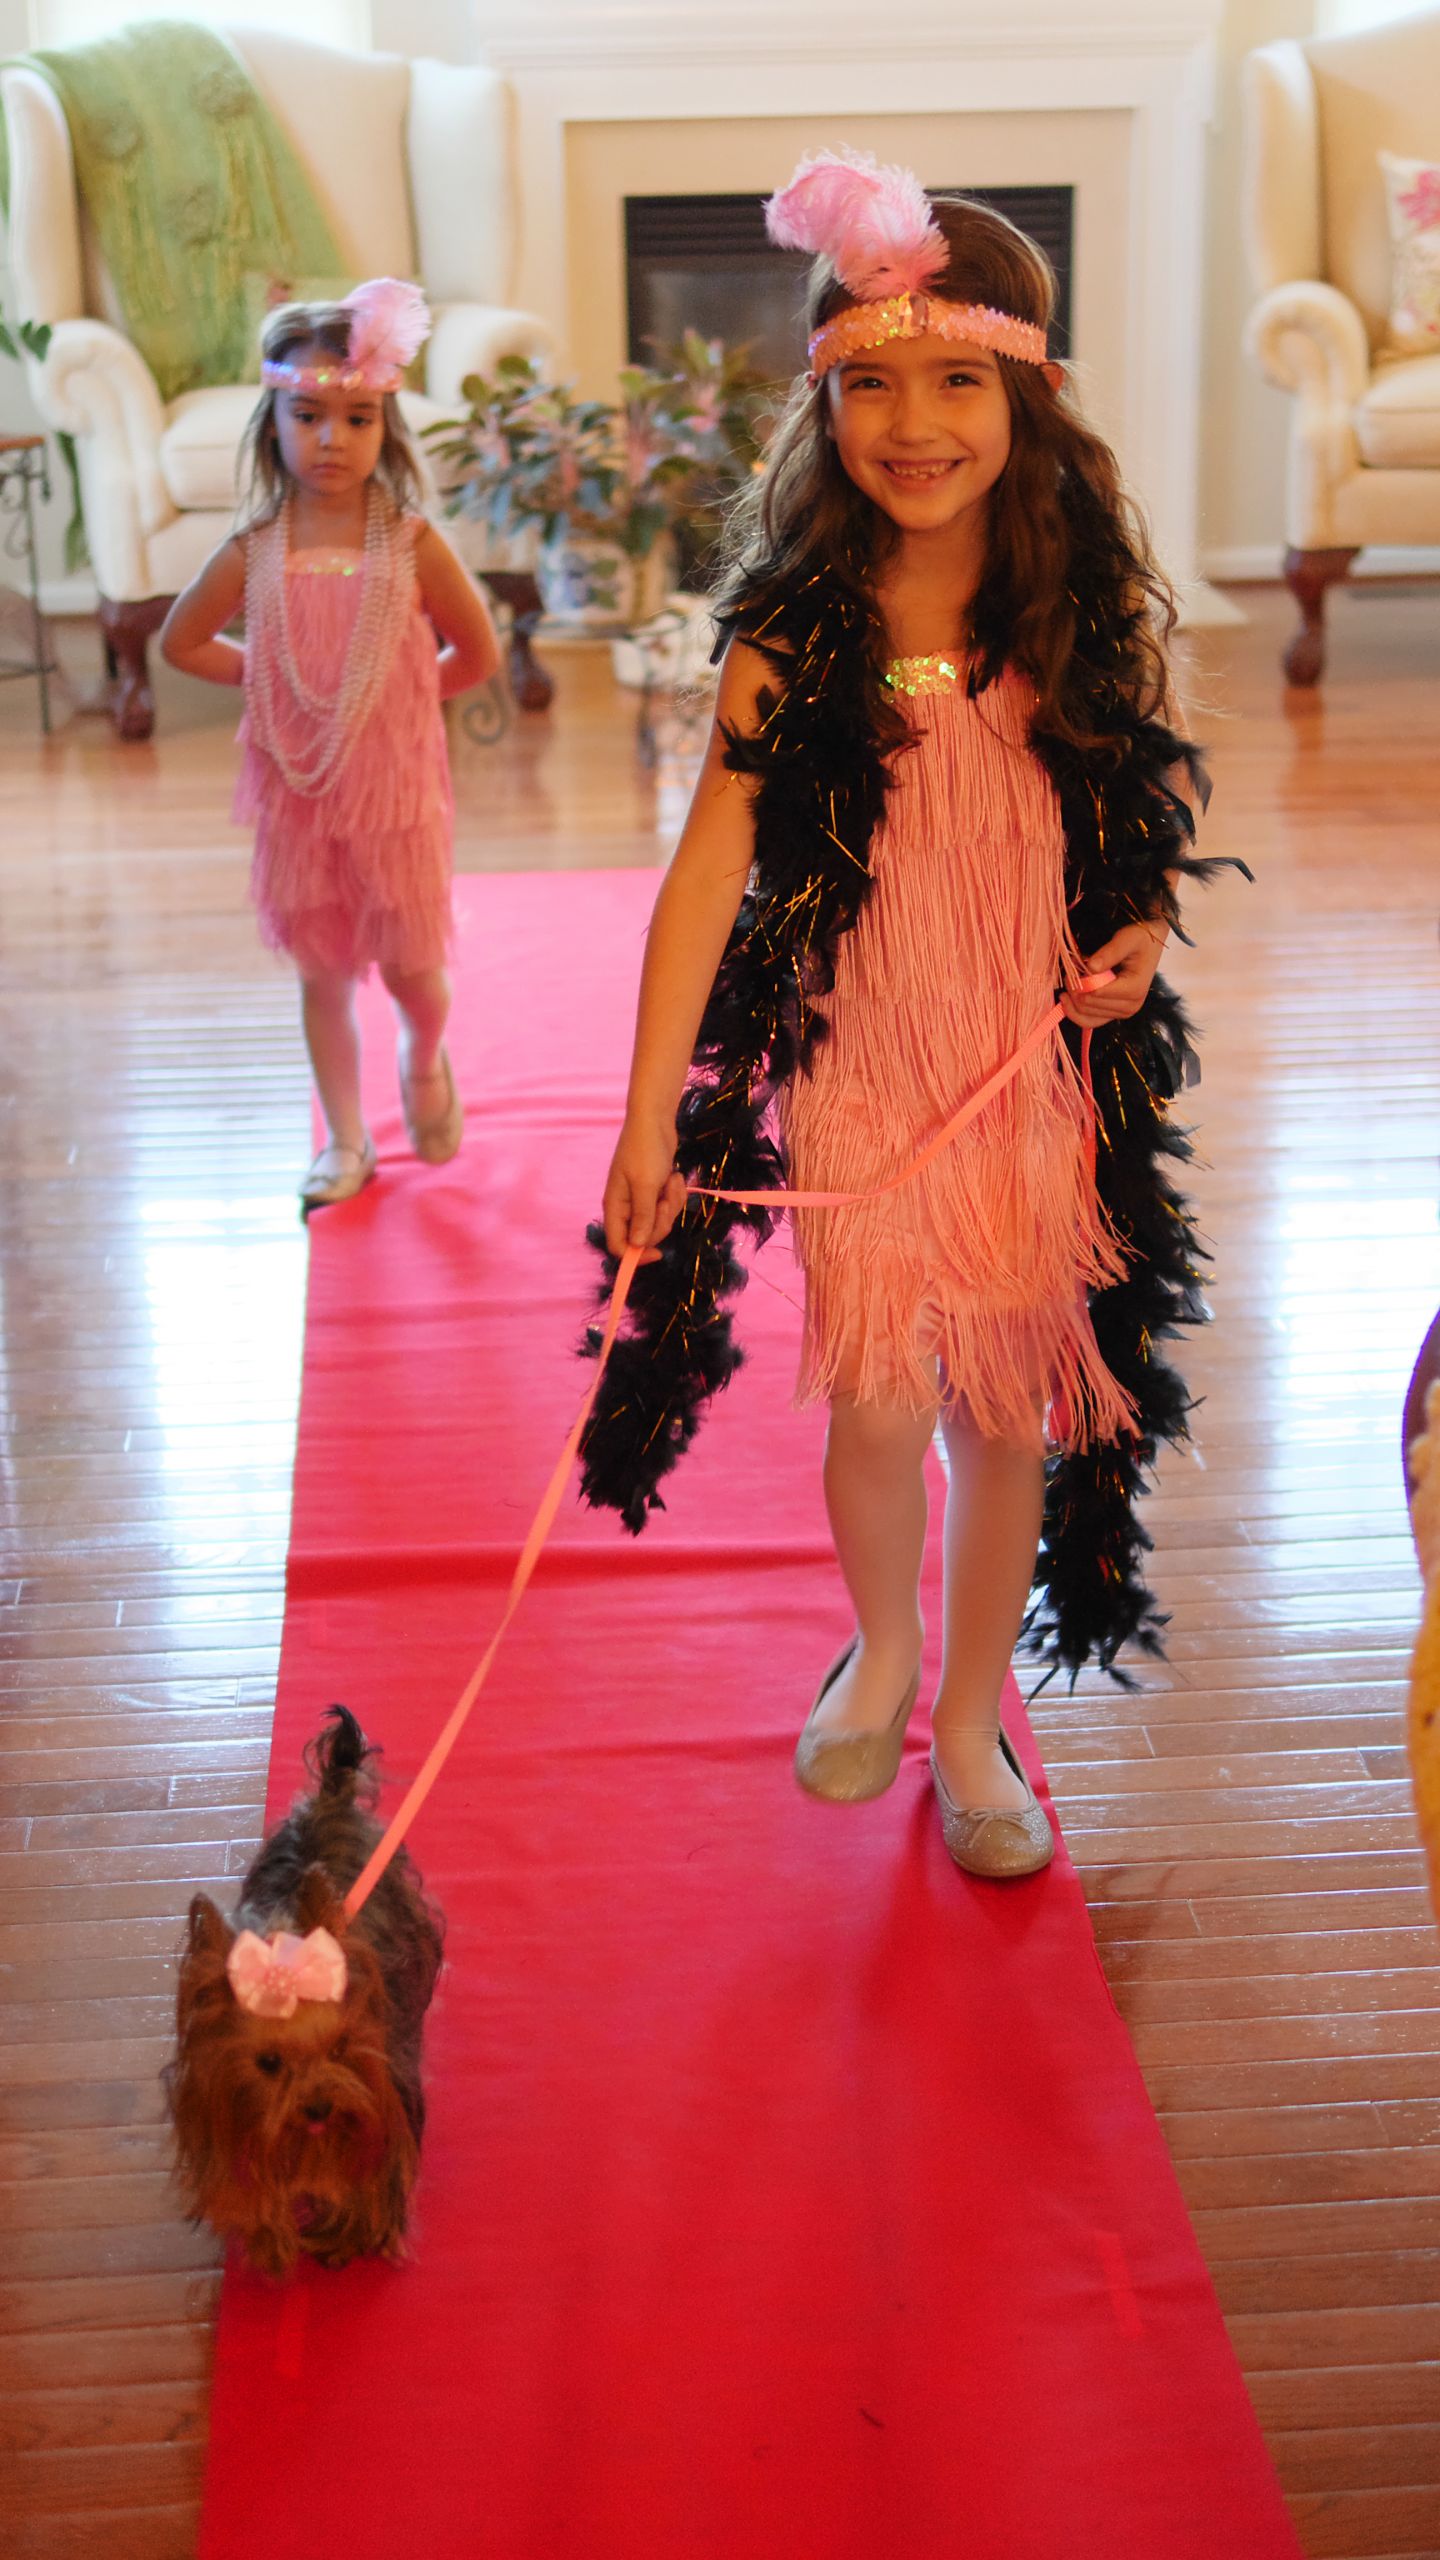 Red Carpet Party Ideas For Kids
 5 Must Try Tips For The Ultimate Kid Friendly Oscar Party